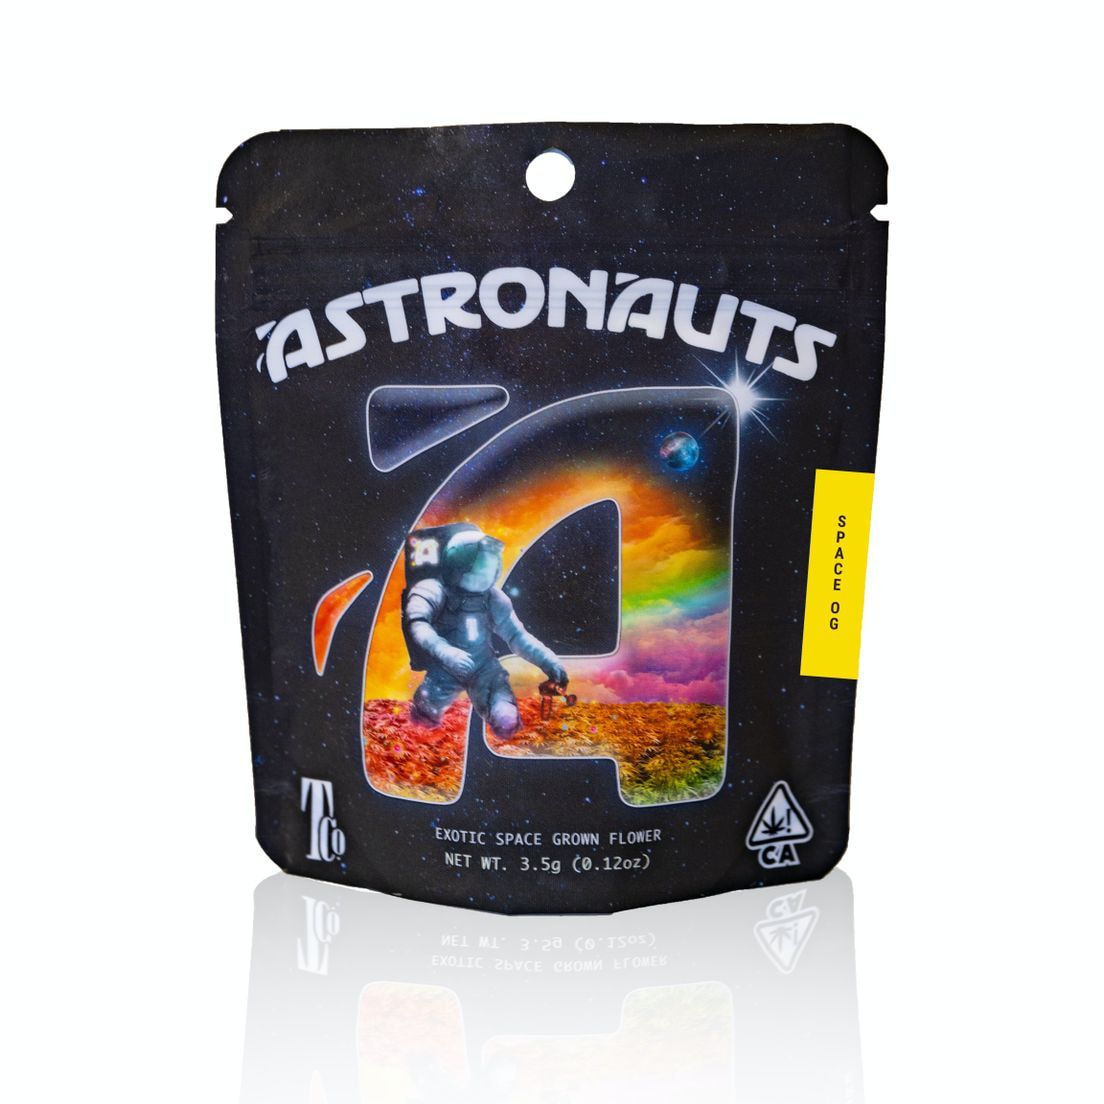 B. Astronauts 28g Space Grown Small Flower - Quality 7/10 - RS51